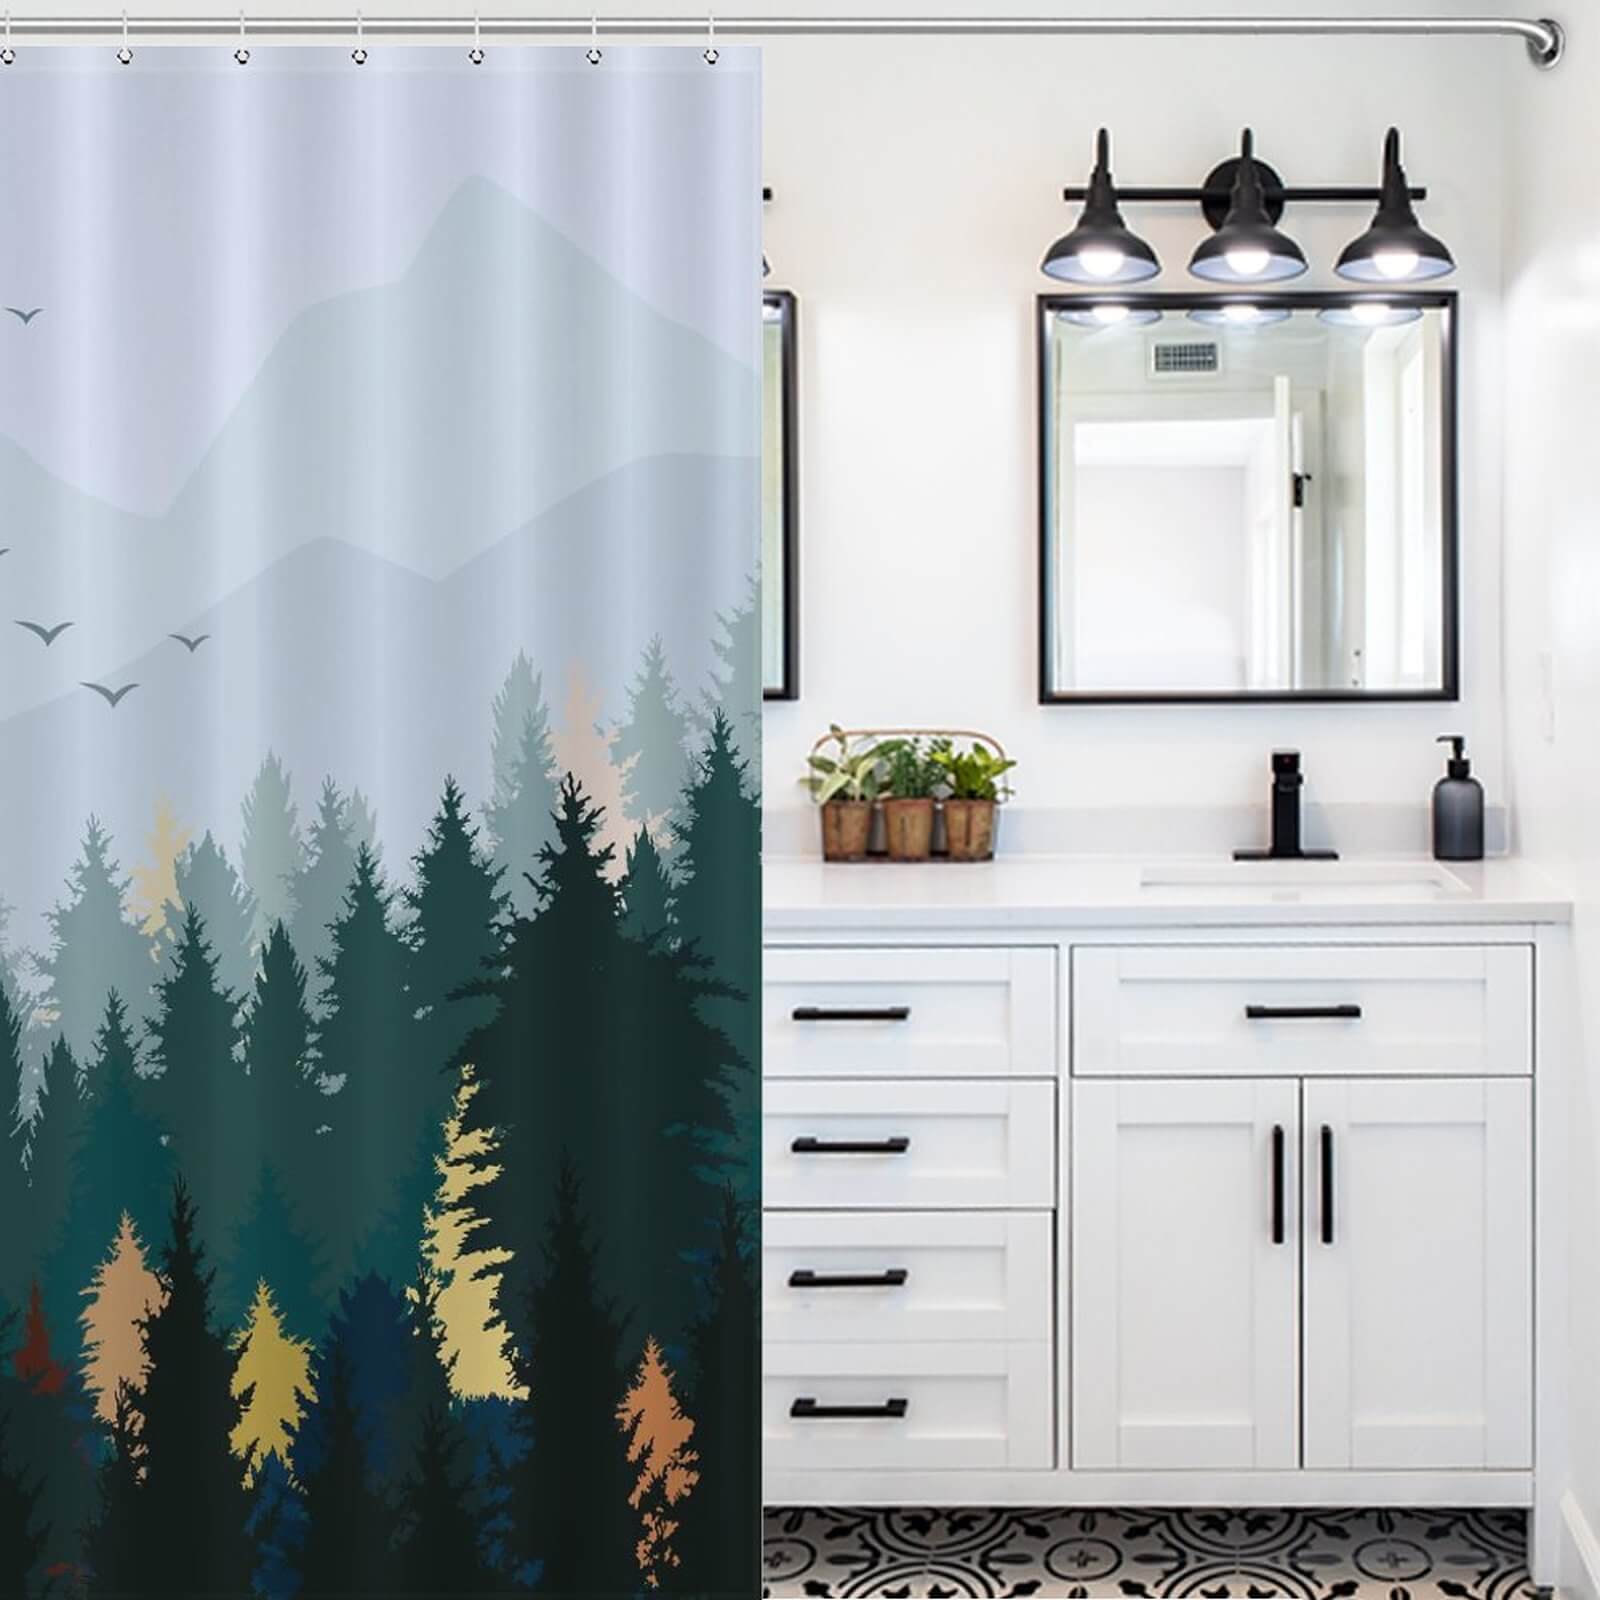 A Pine Forest Shower Curtain-Cottoncat featuring a forest scene, perfect for bathroom decor by Cotton Cat.